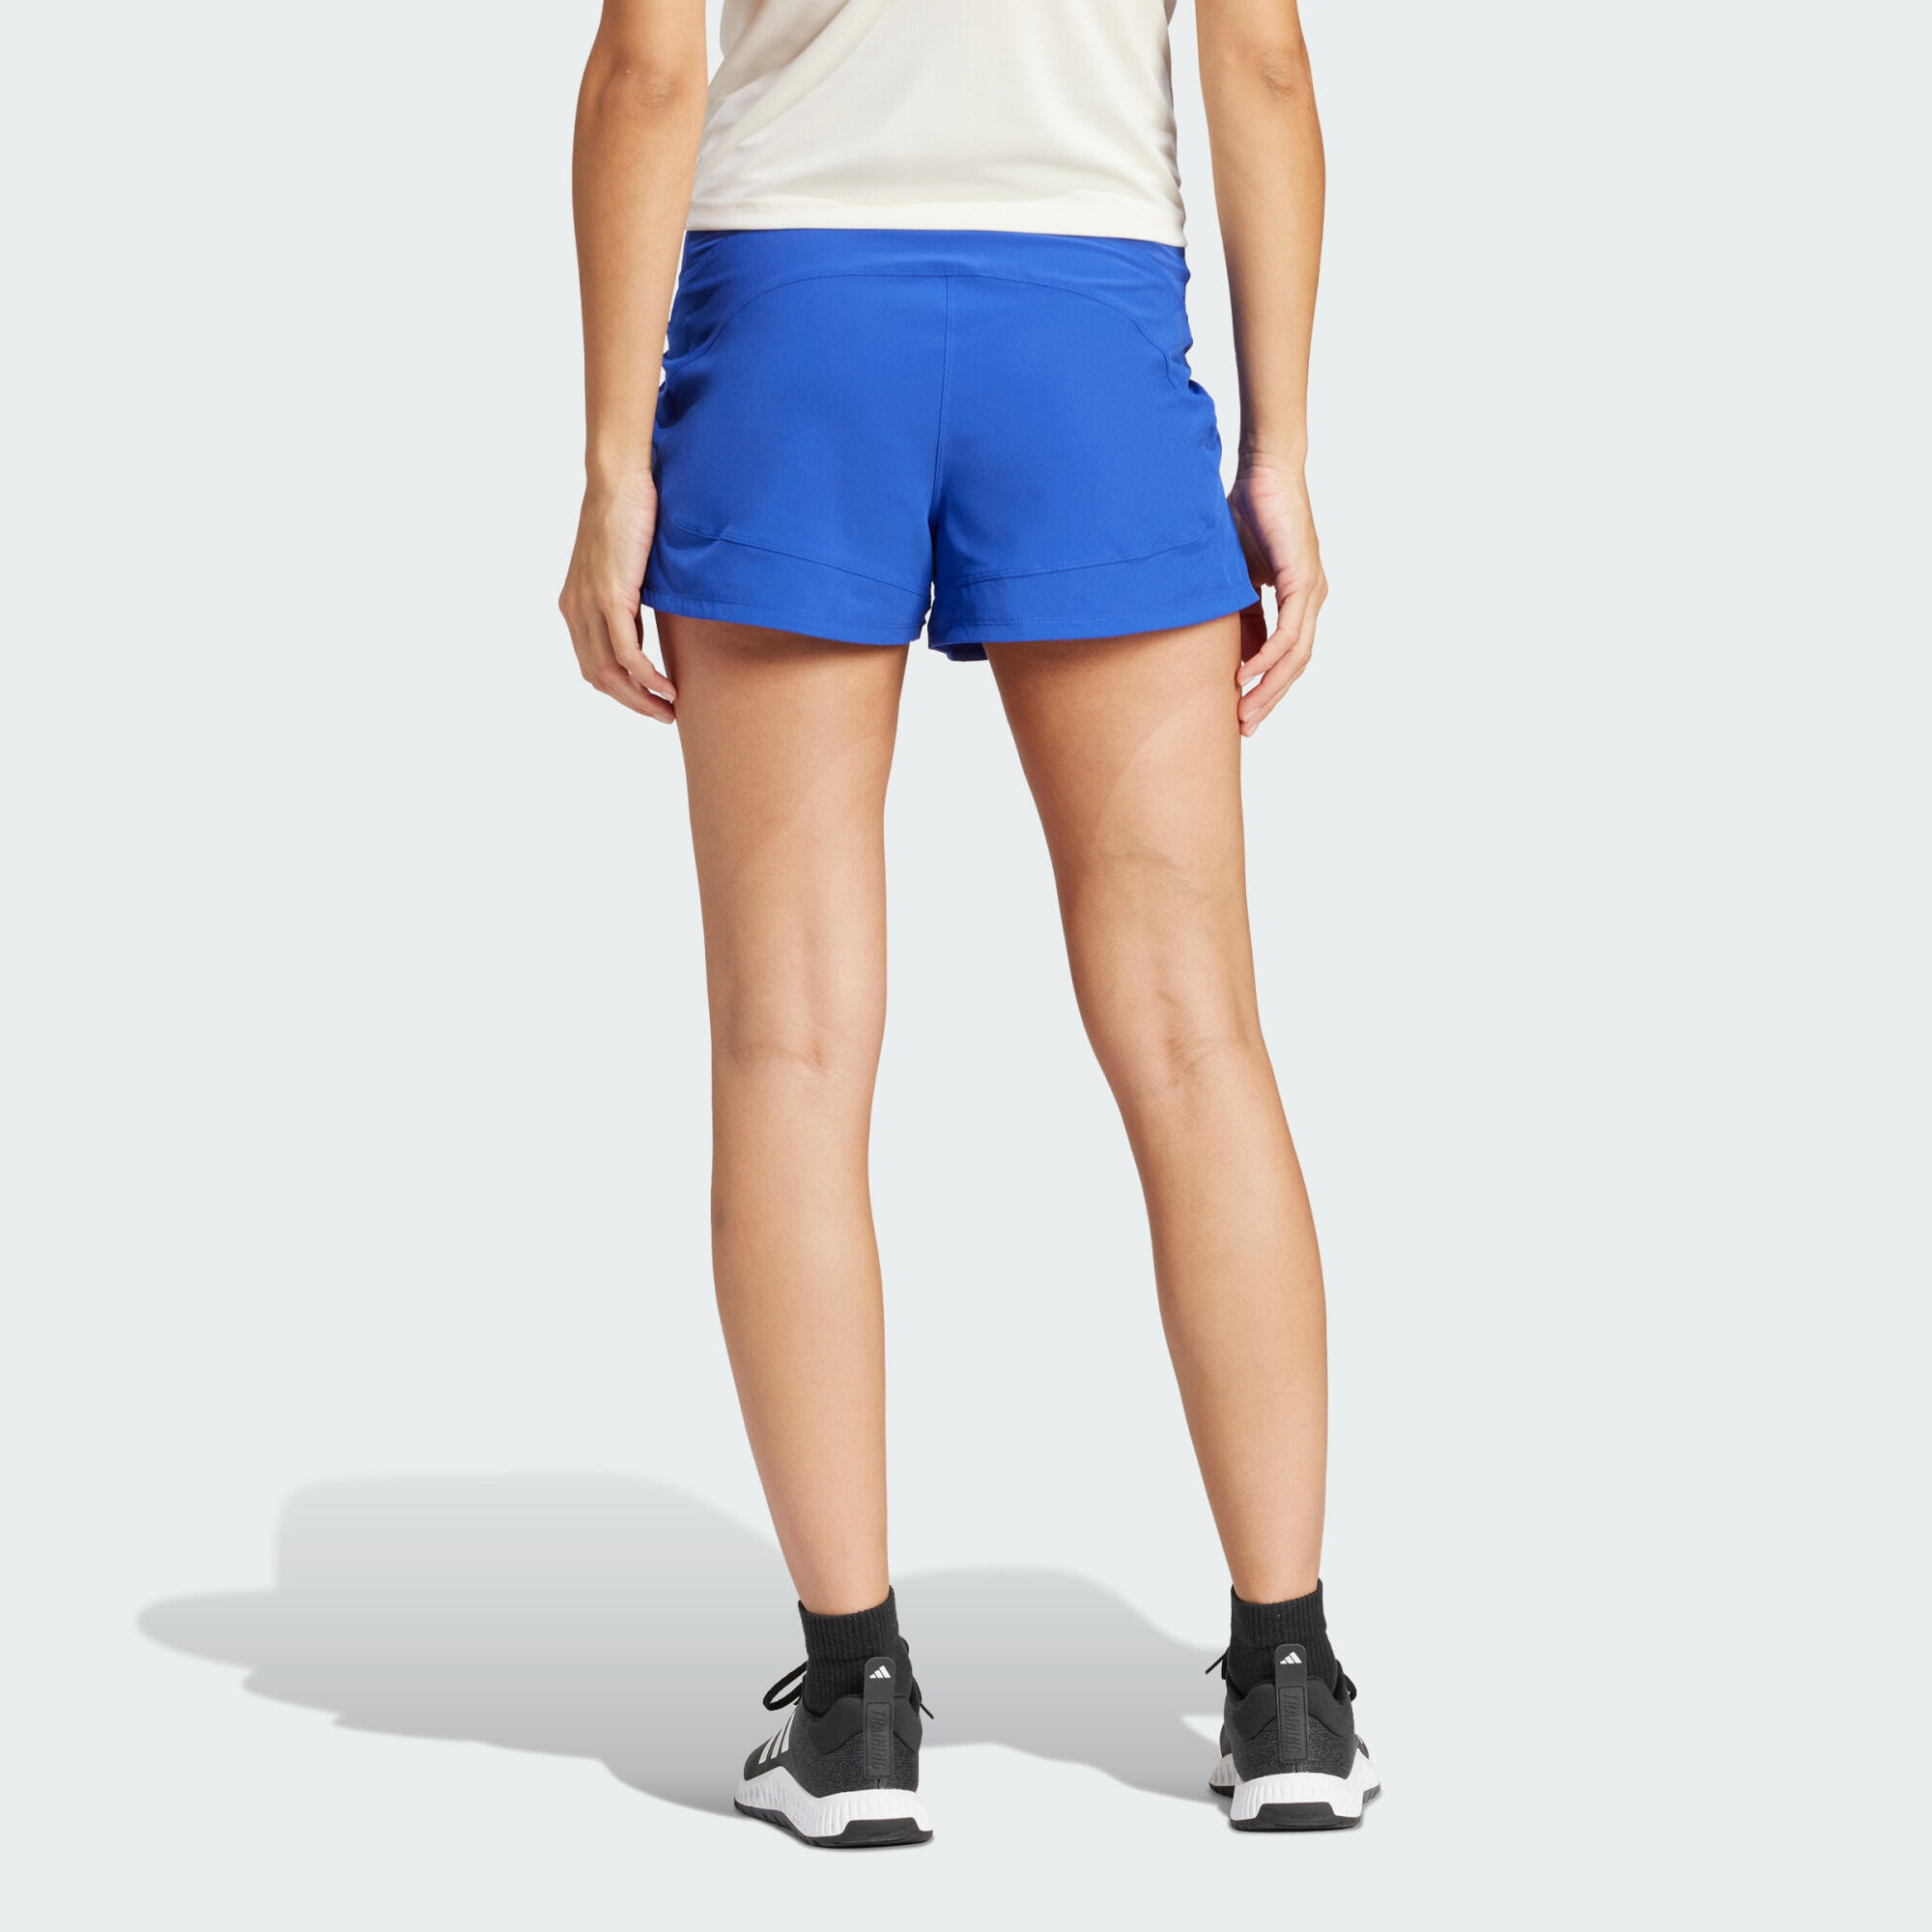 Pacer Woven Stretch Training Maternity Shorts 3/5